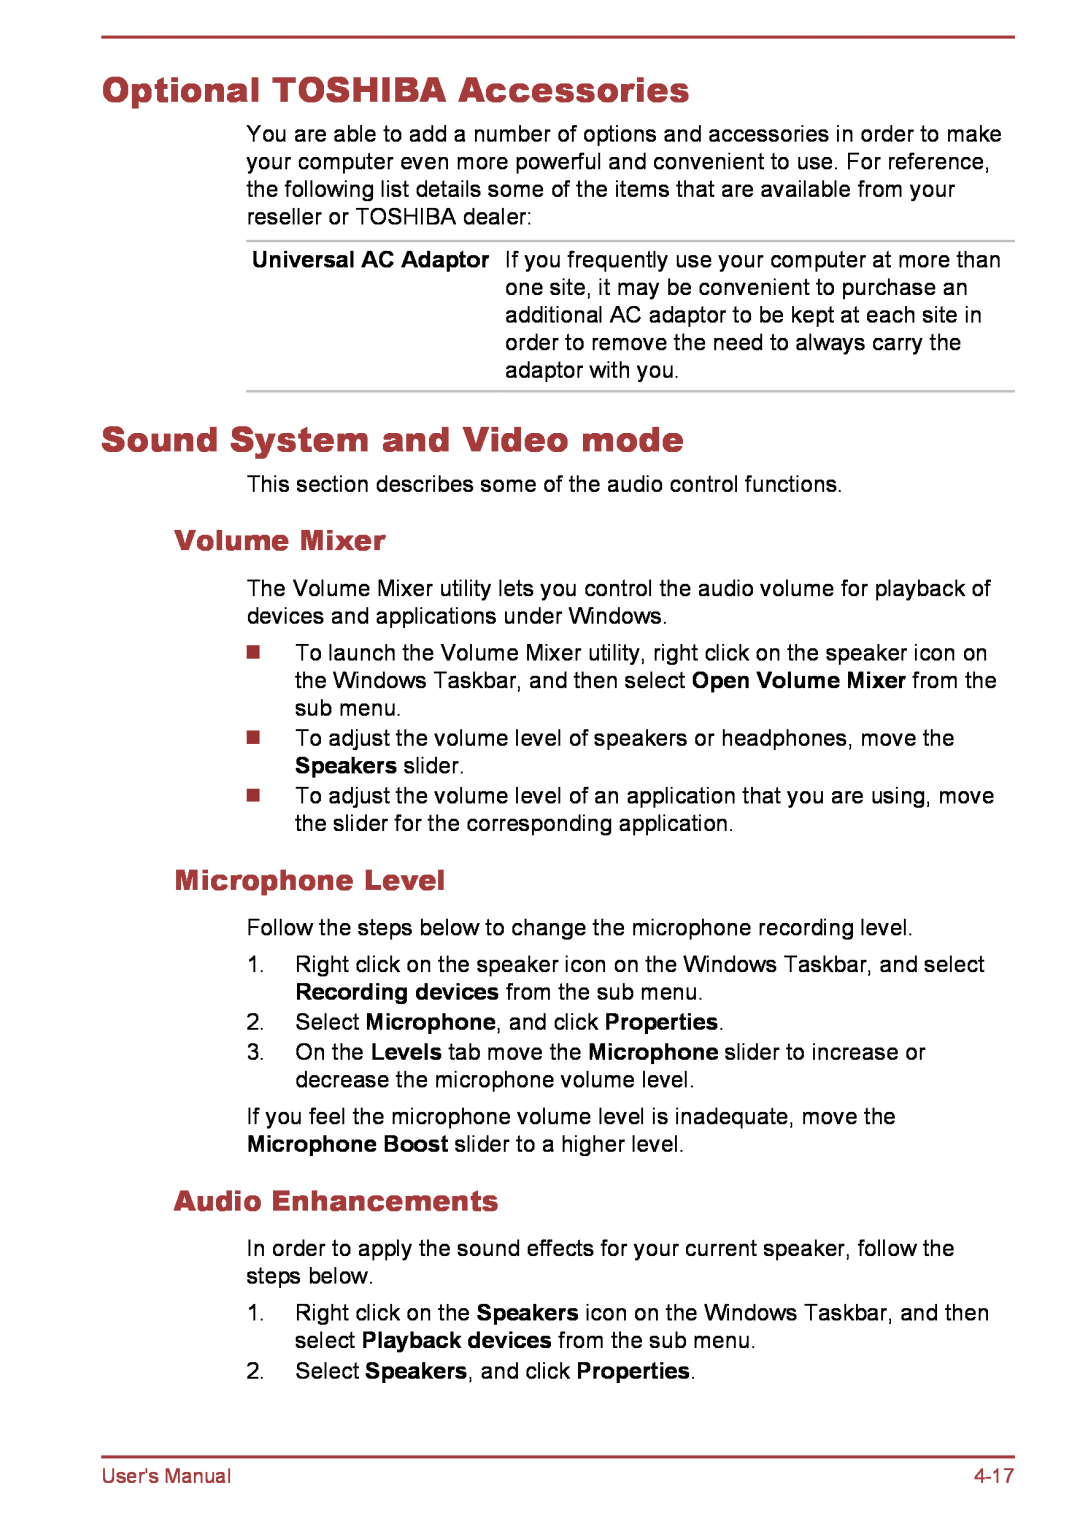 Toshiba L35W-B, L30W-B user manual Optional TOSHIBA Accessories, Sound System and Video mode, Volume Mixer, Microphone Level 